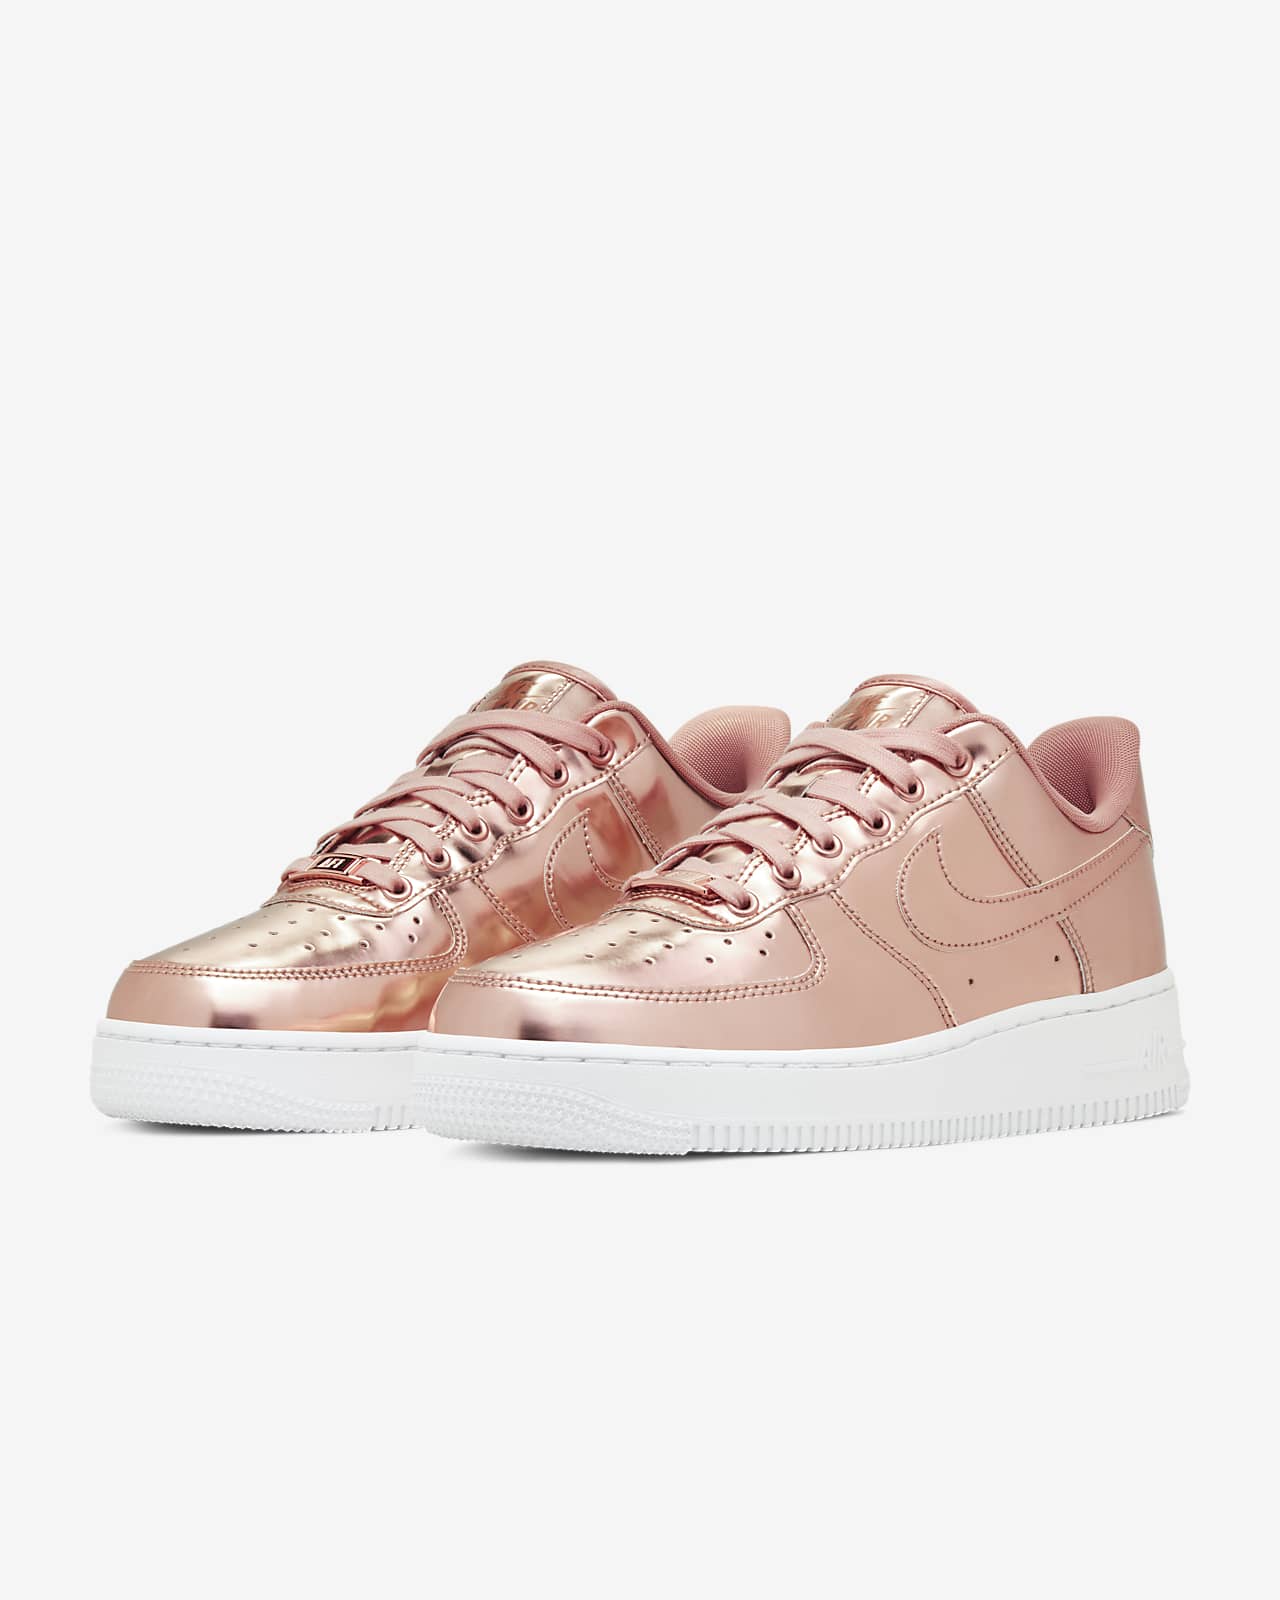 nike air force 1 women's gold